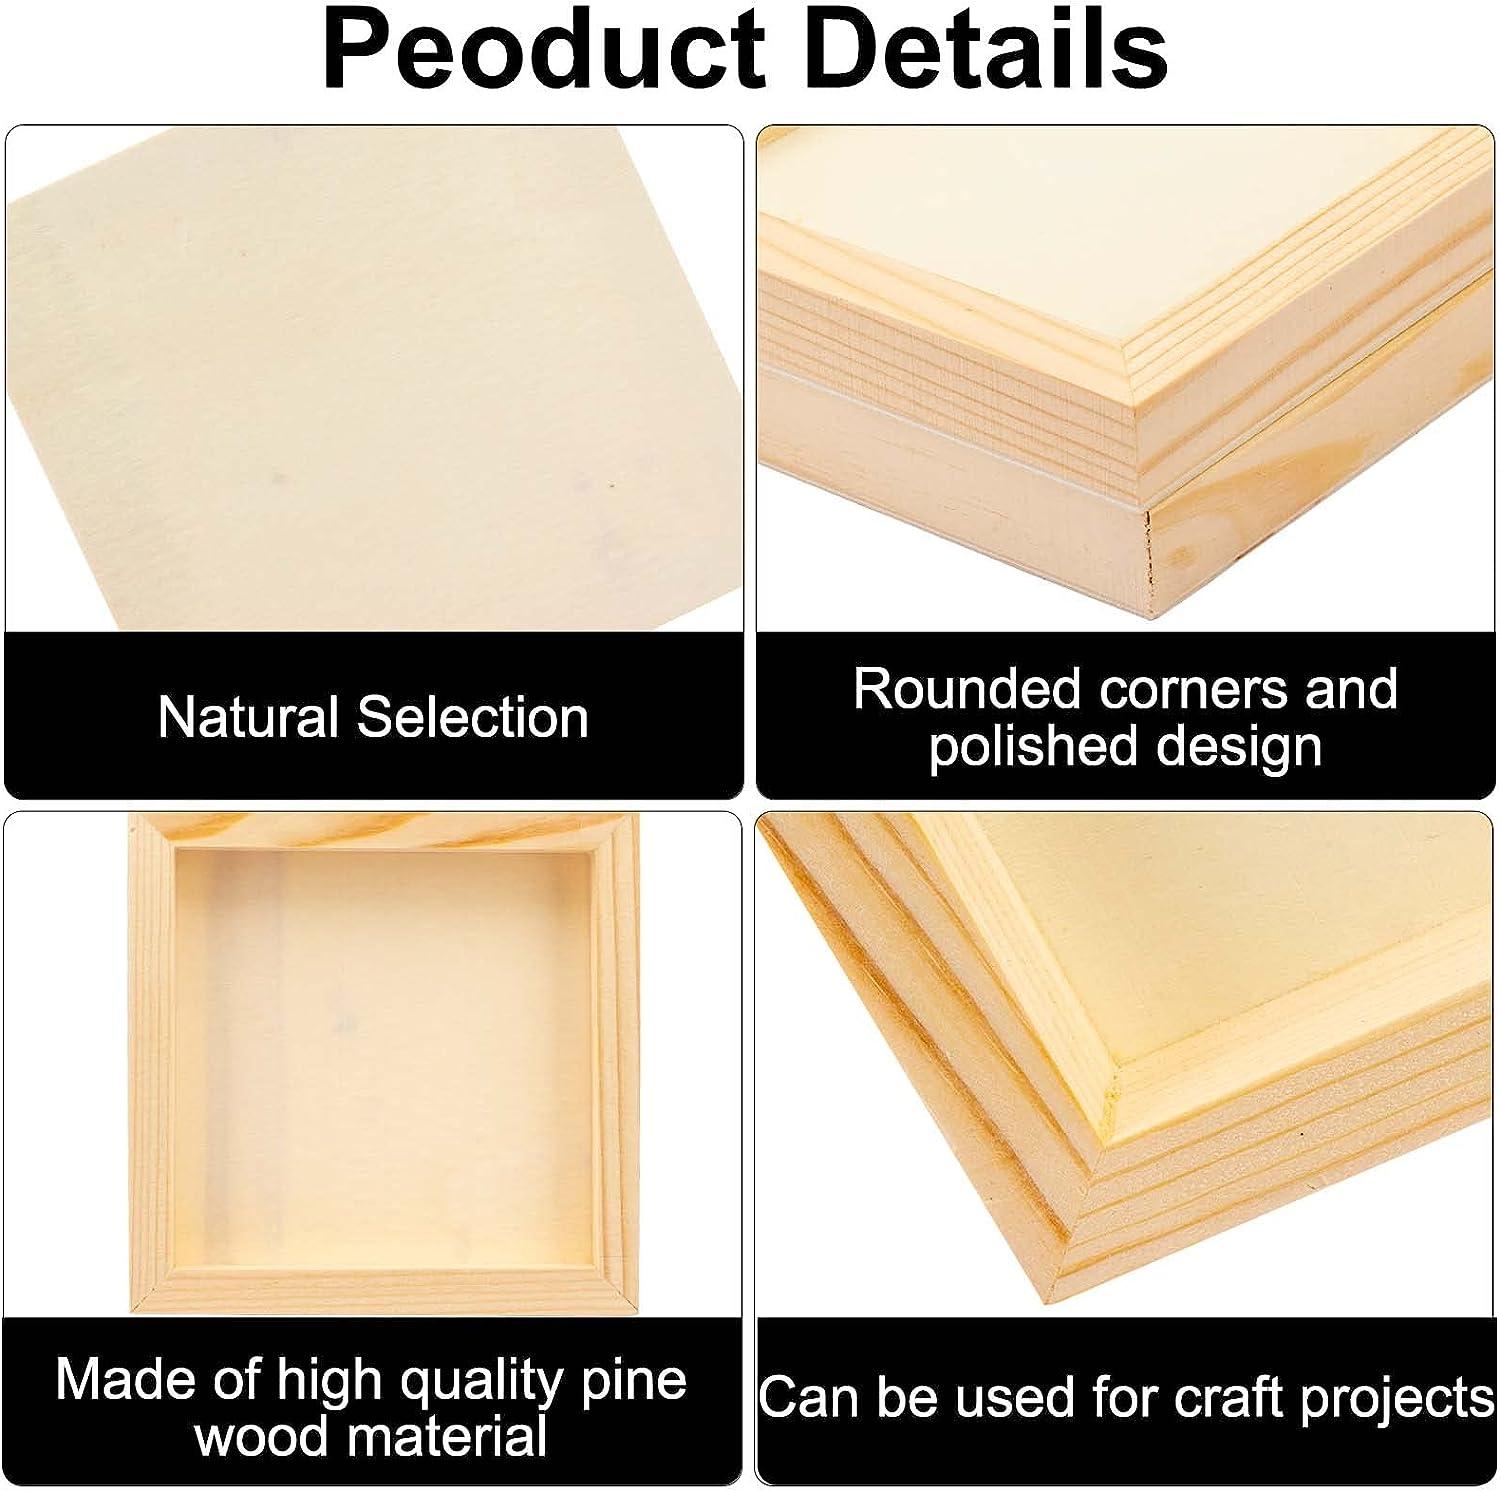 6 Pack Unfinished Wood Canvas Boards for Painting, 6x6 Square Wooden Panels  for Crafts, PACK - Kroger